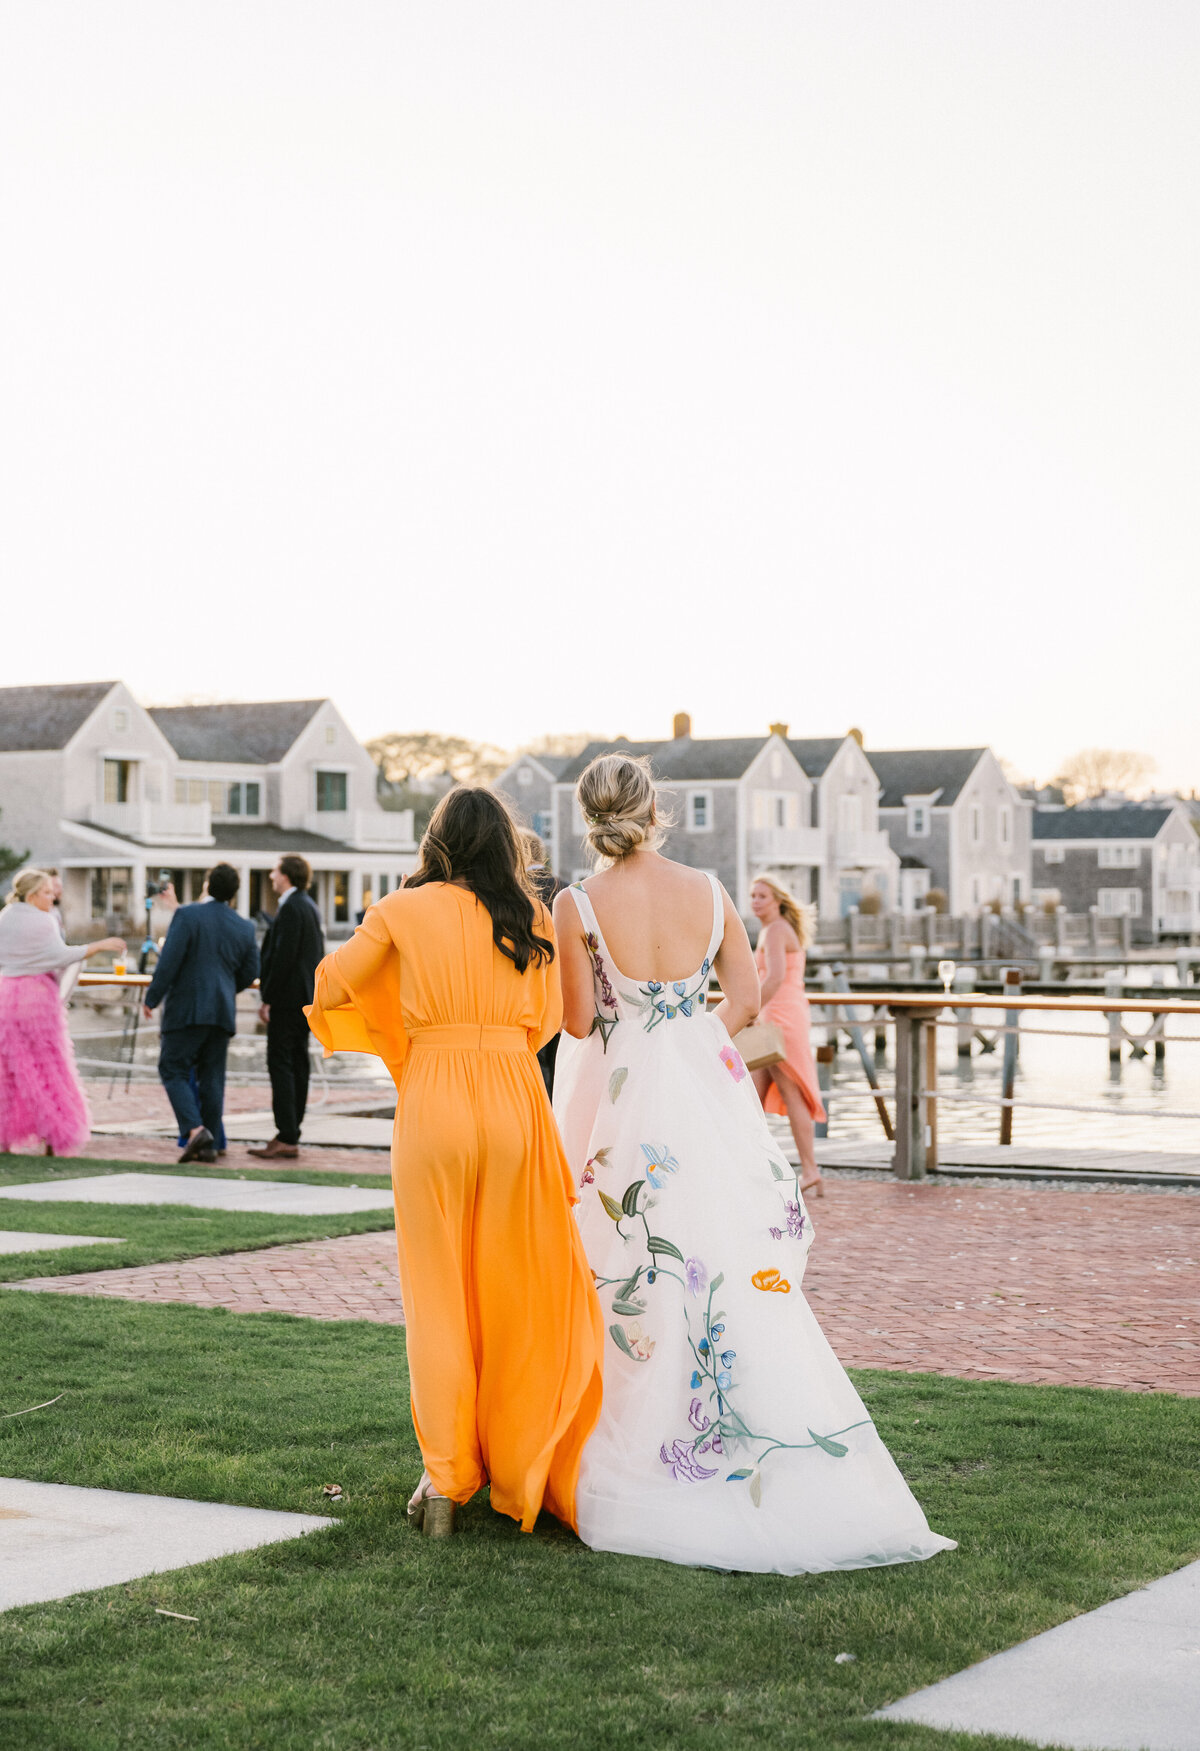 Maggie Stewart Events Full Service Wedding Event Coordinator Nantucket Event Planning Coordination Services Conceptualization Execution Design Luxury Weddings Schuyler and Marshall Previews_RLP_79